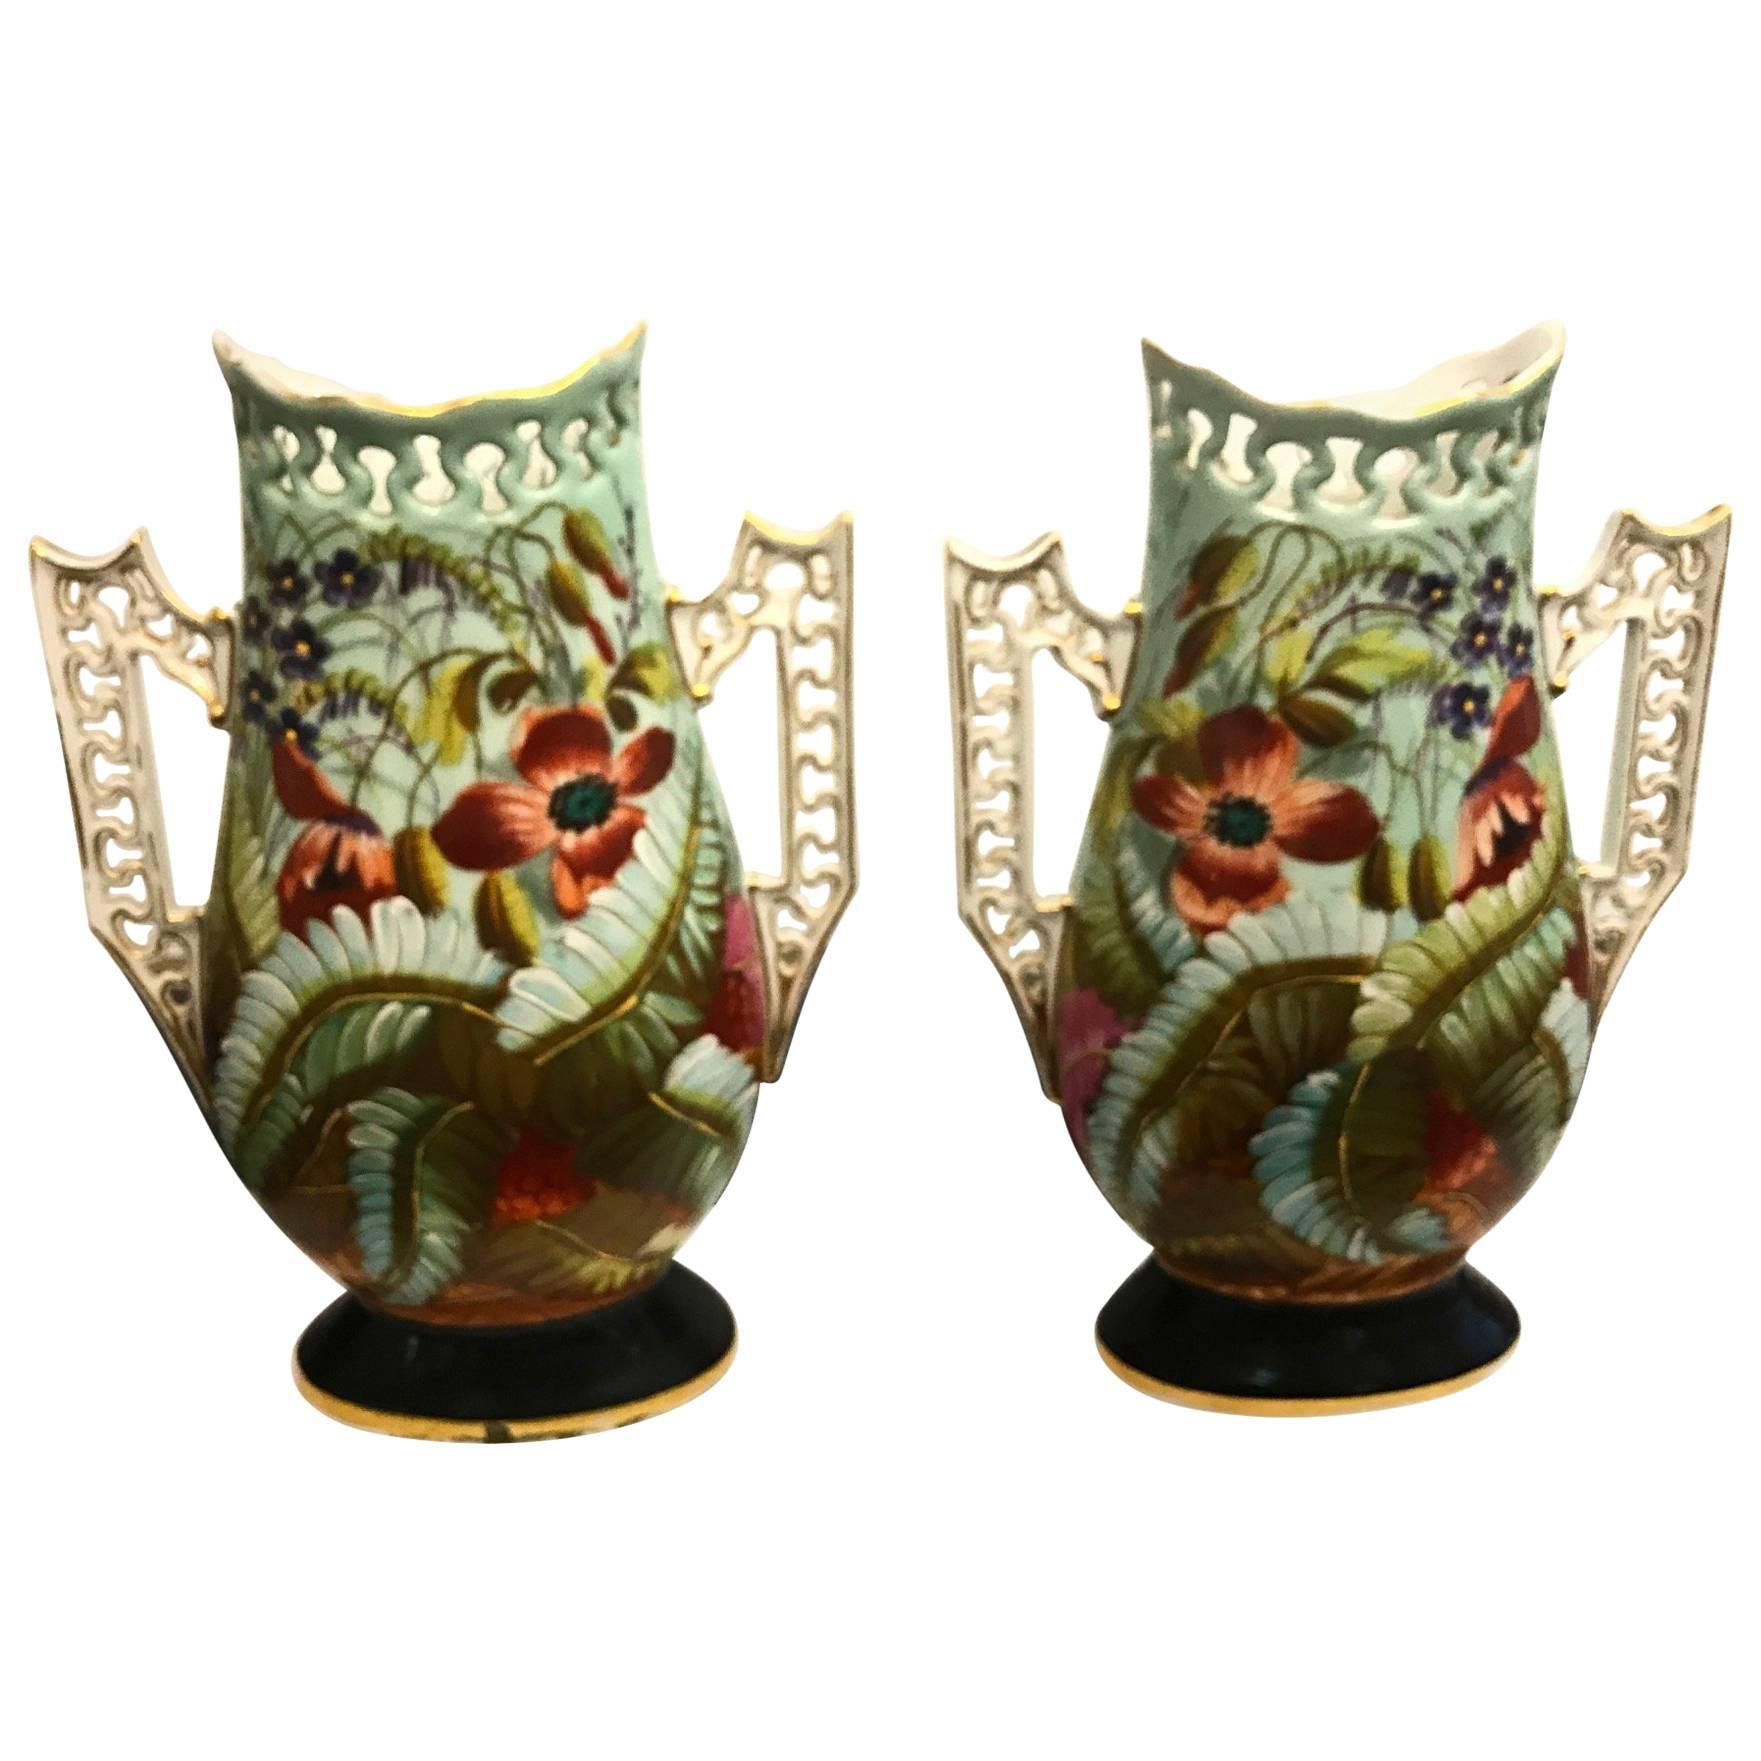 Pair of 19th Century French Porcelain Hand-Painted Vases